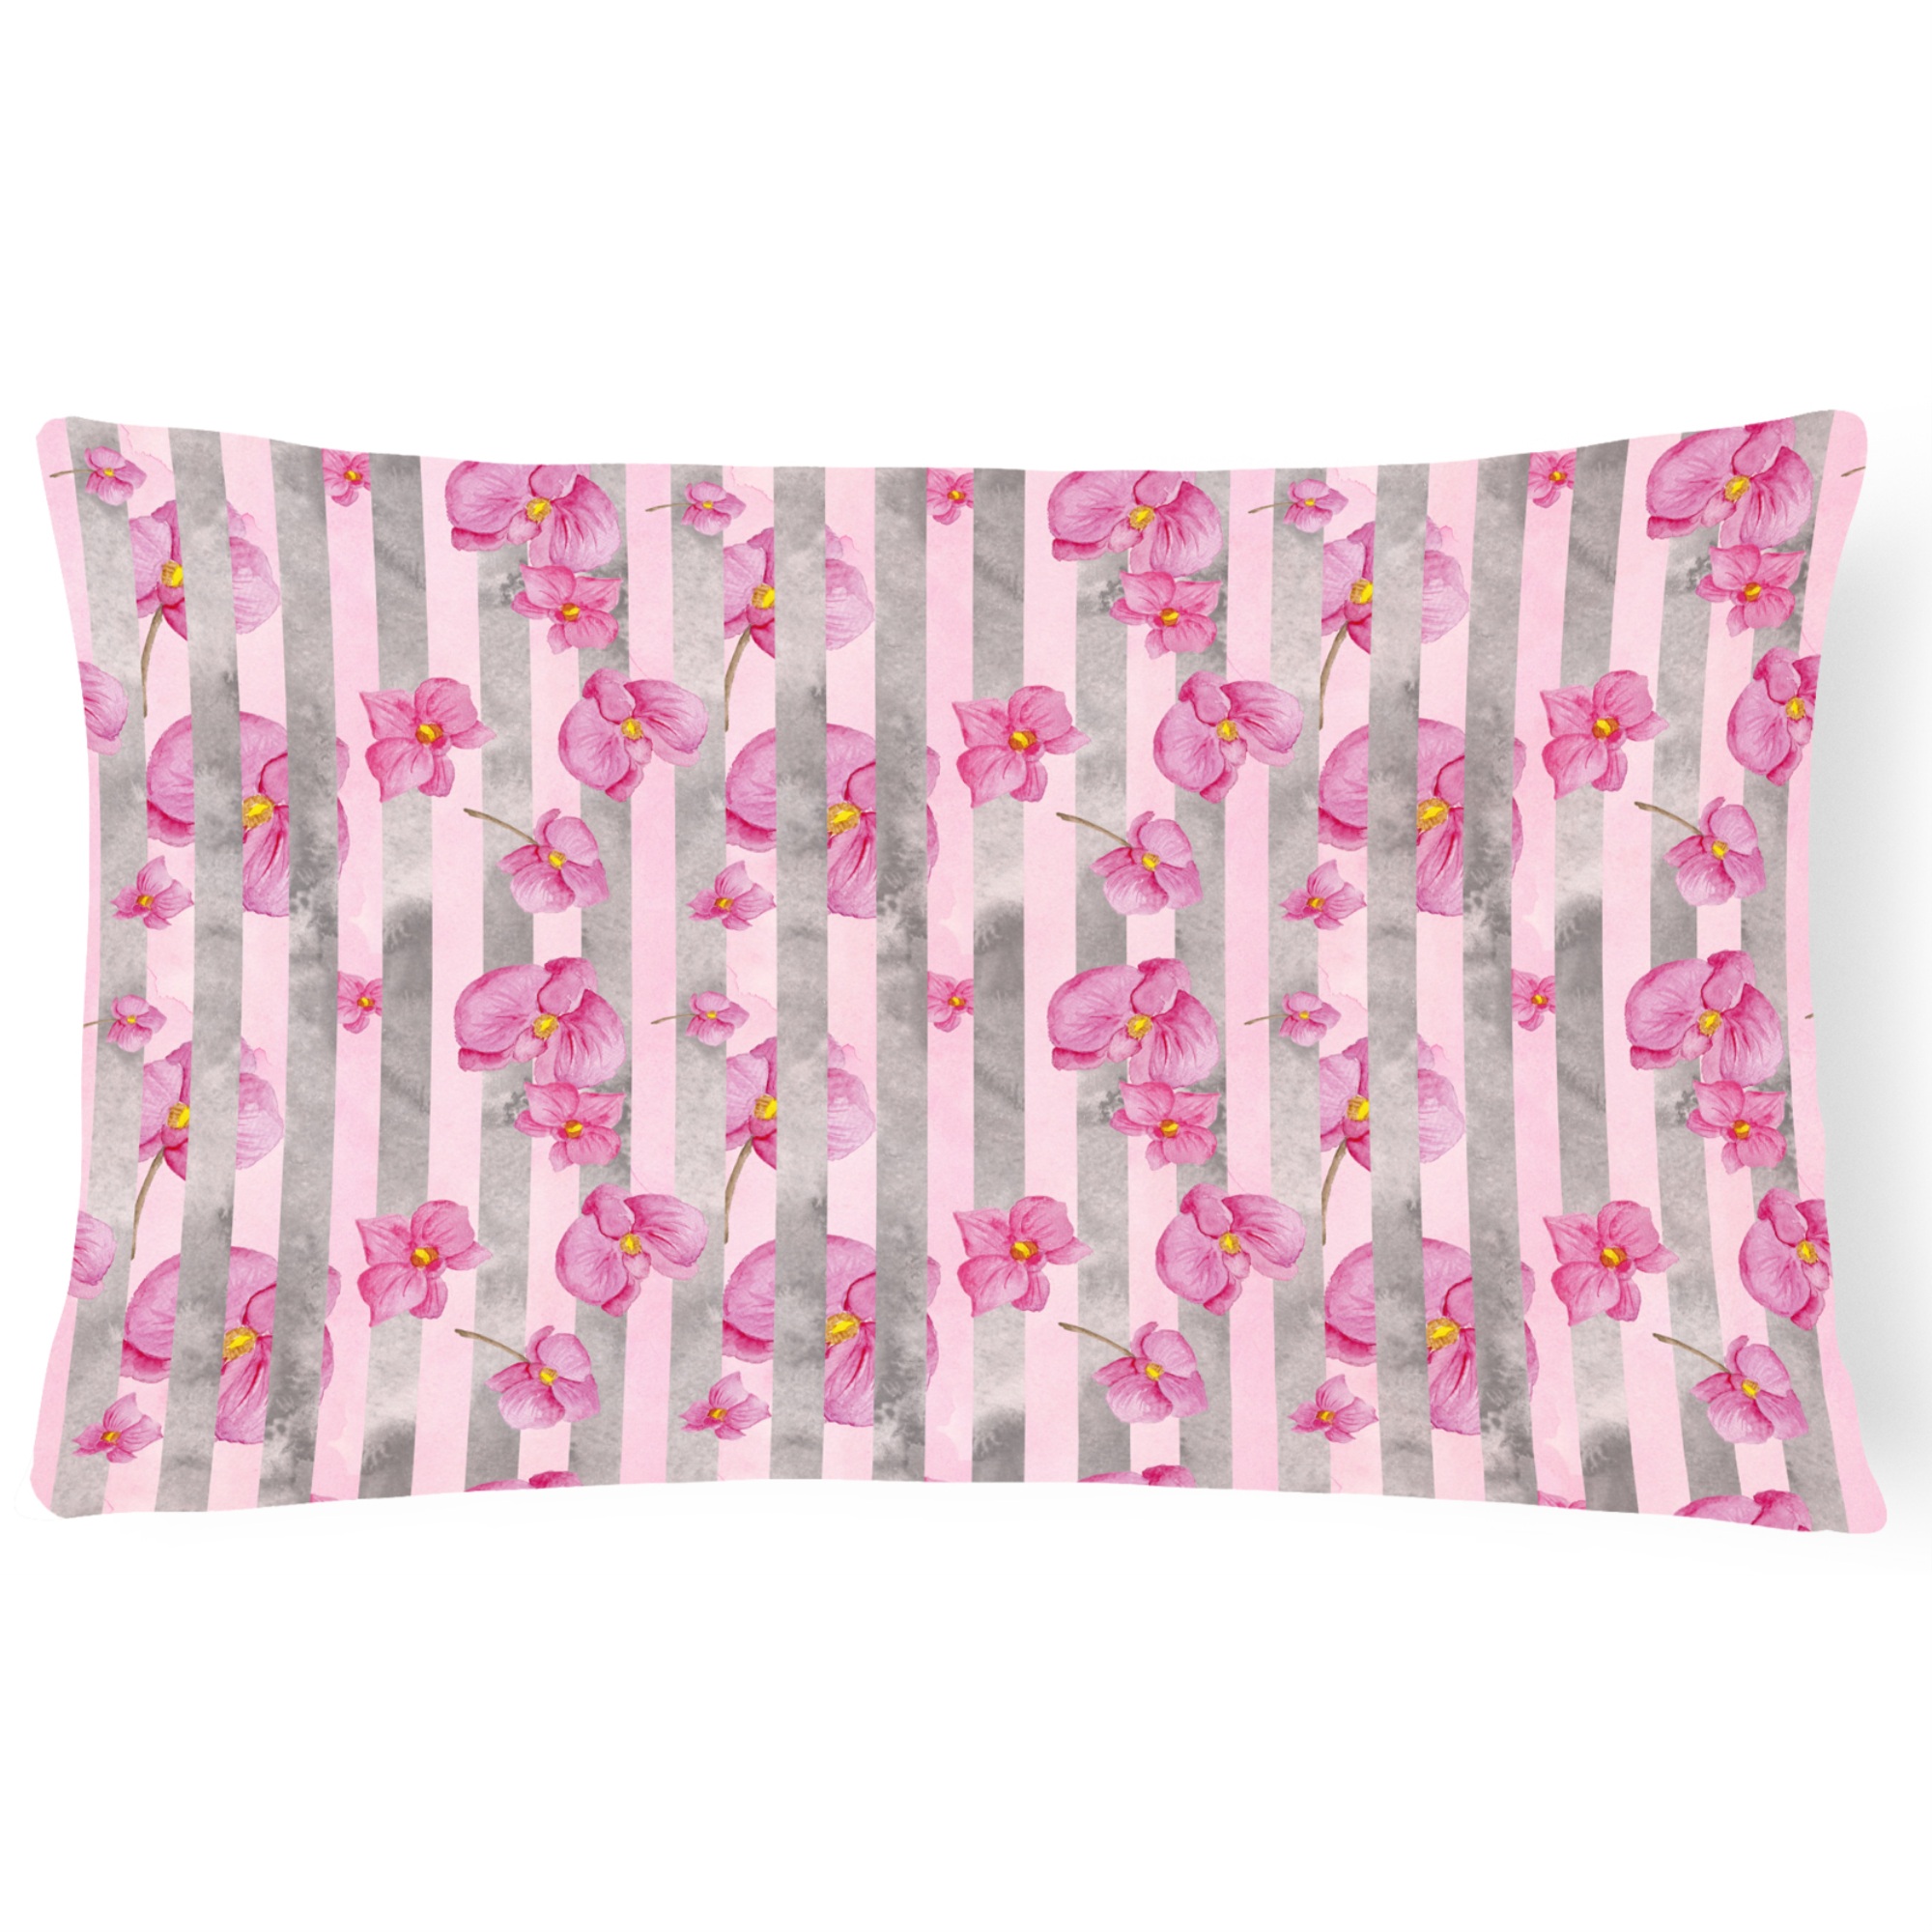 Caroline's Treasures "Caroline's Treasures BB7502PW1216 Watercolor Pink Flowers Grey Stripes Outdoor Canvas Pillow, Multicolor"